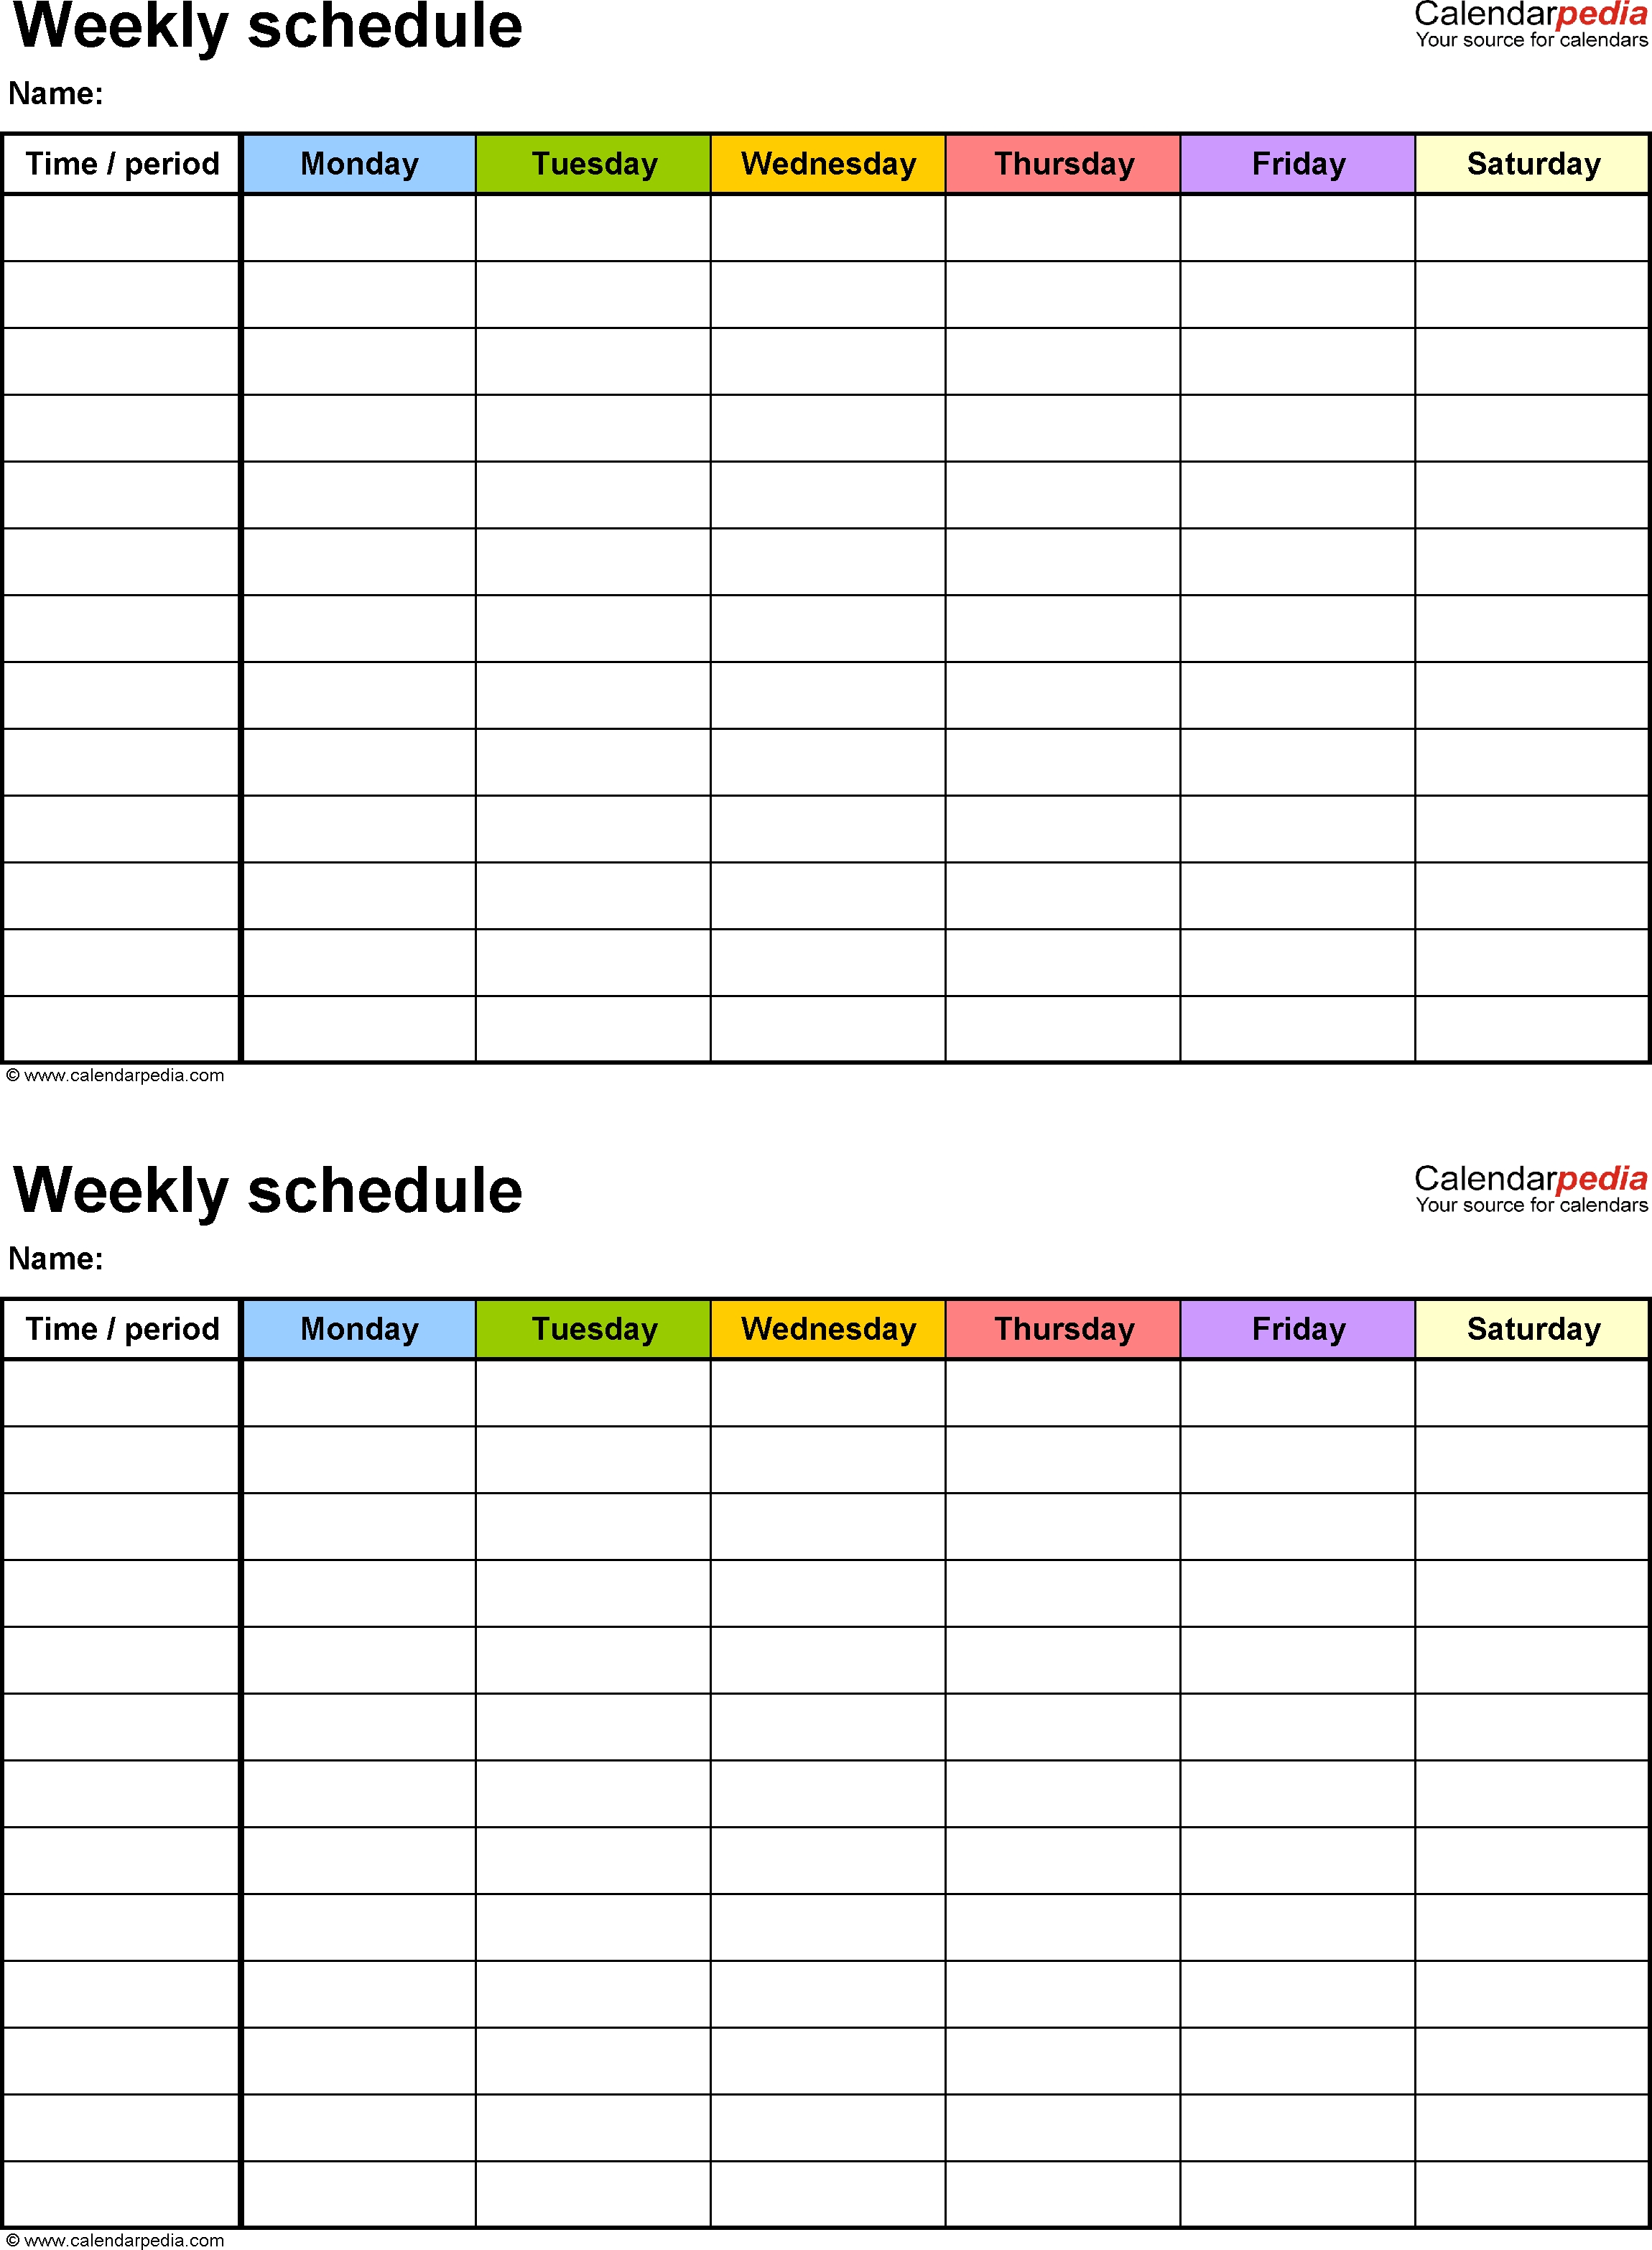 Free Weekly Schedule Templates For Word - 18 Templates regarding 7 Day Weekly Planner Template